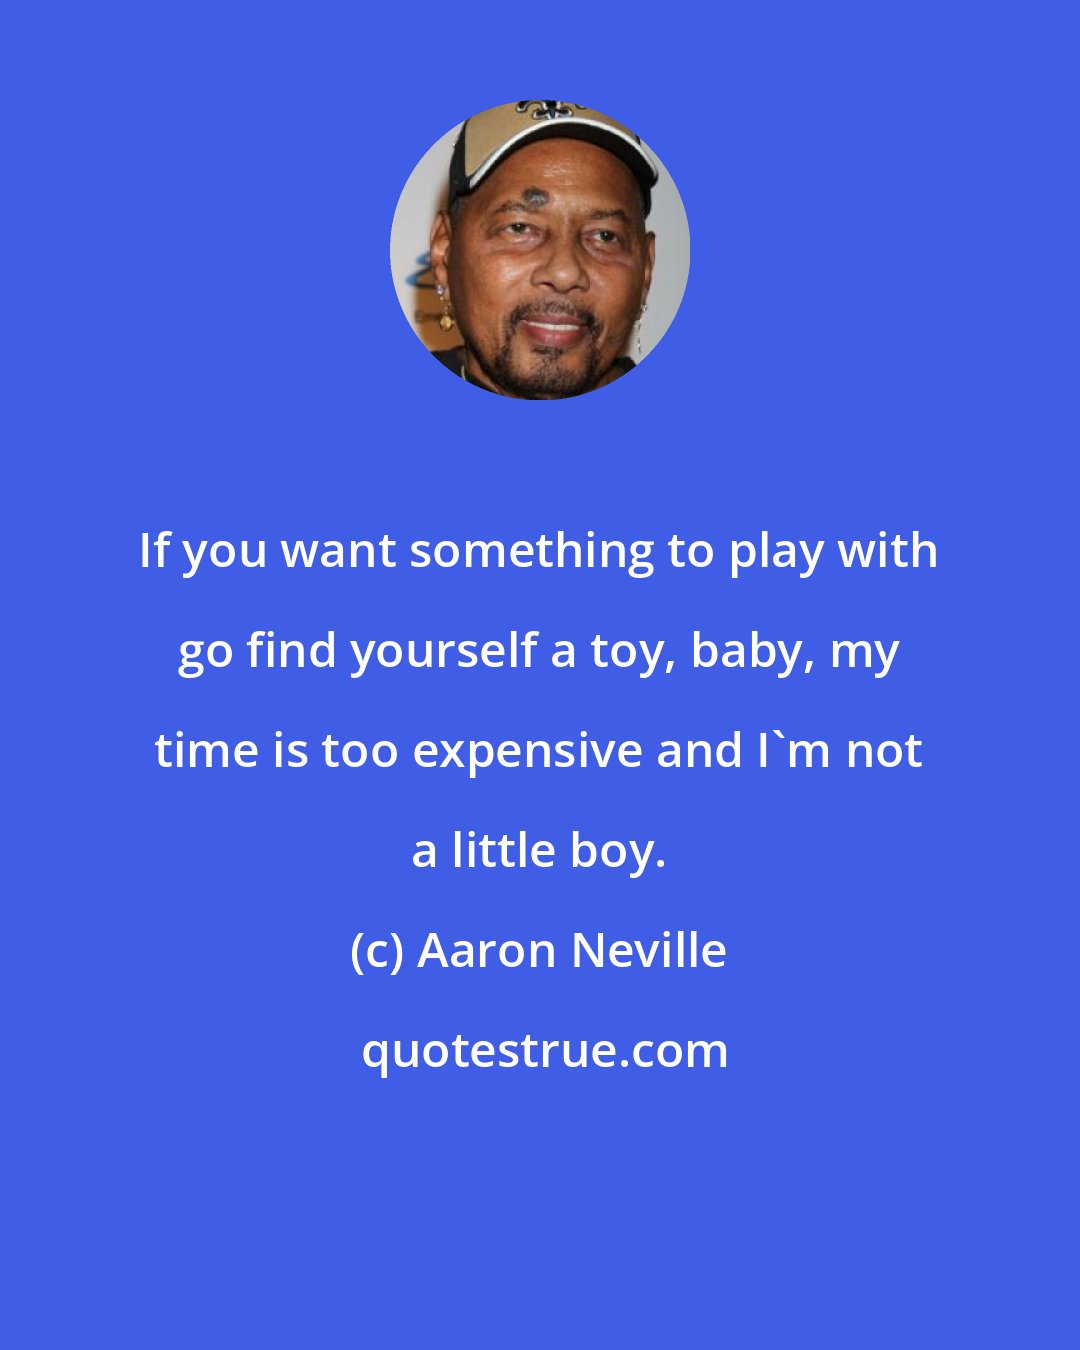 Aaron Neville: If you want something to play with go find yourself a toy, baby, my time is too expensive and I'm not a little boy.